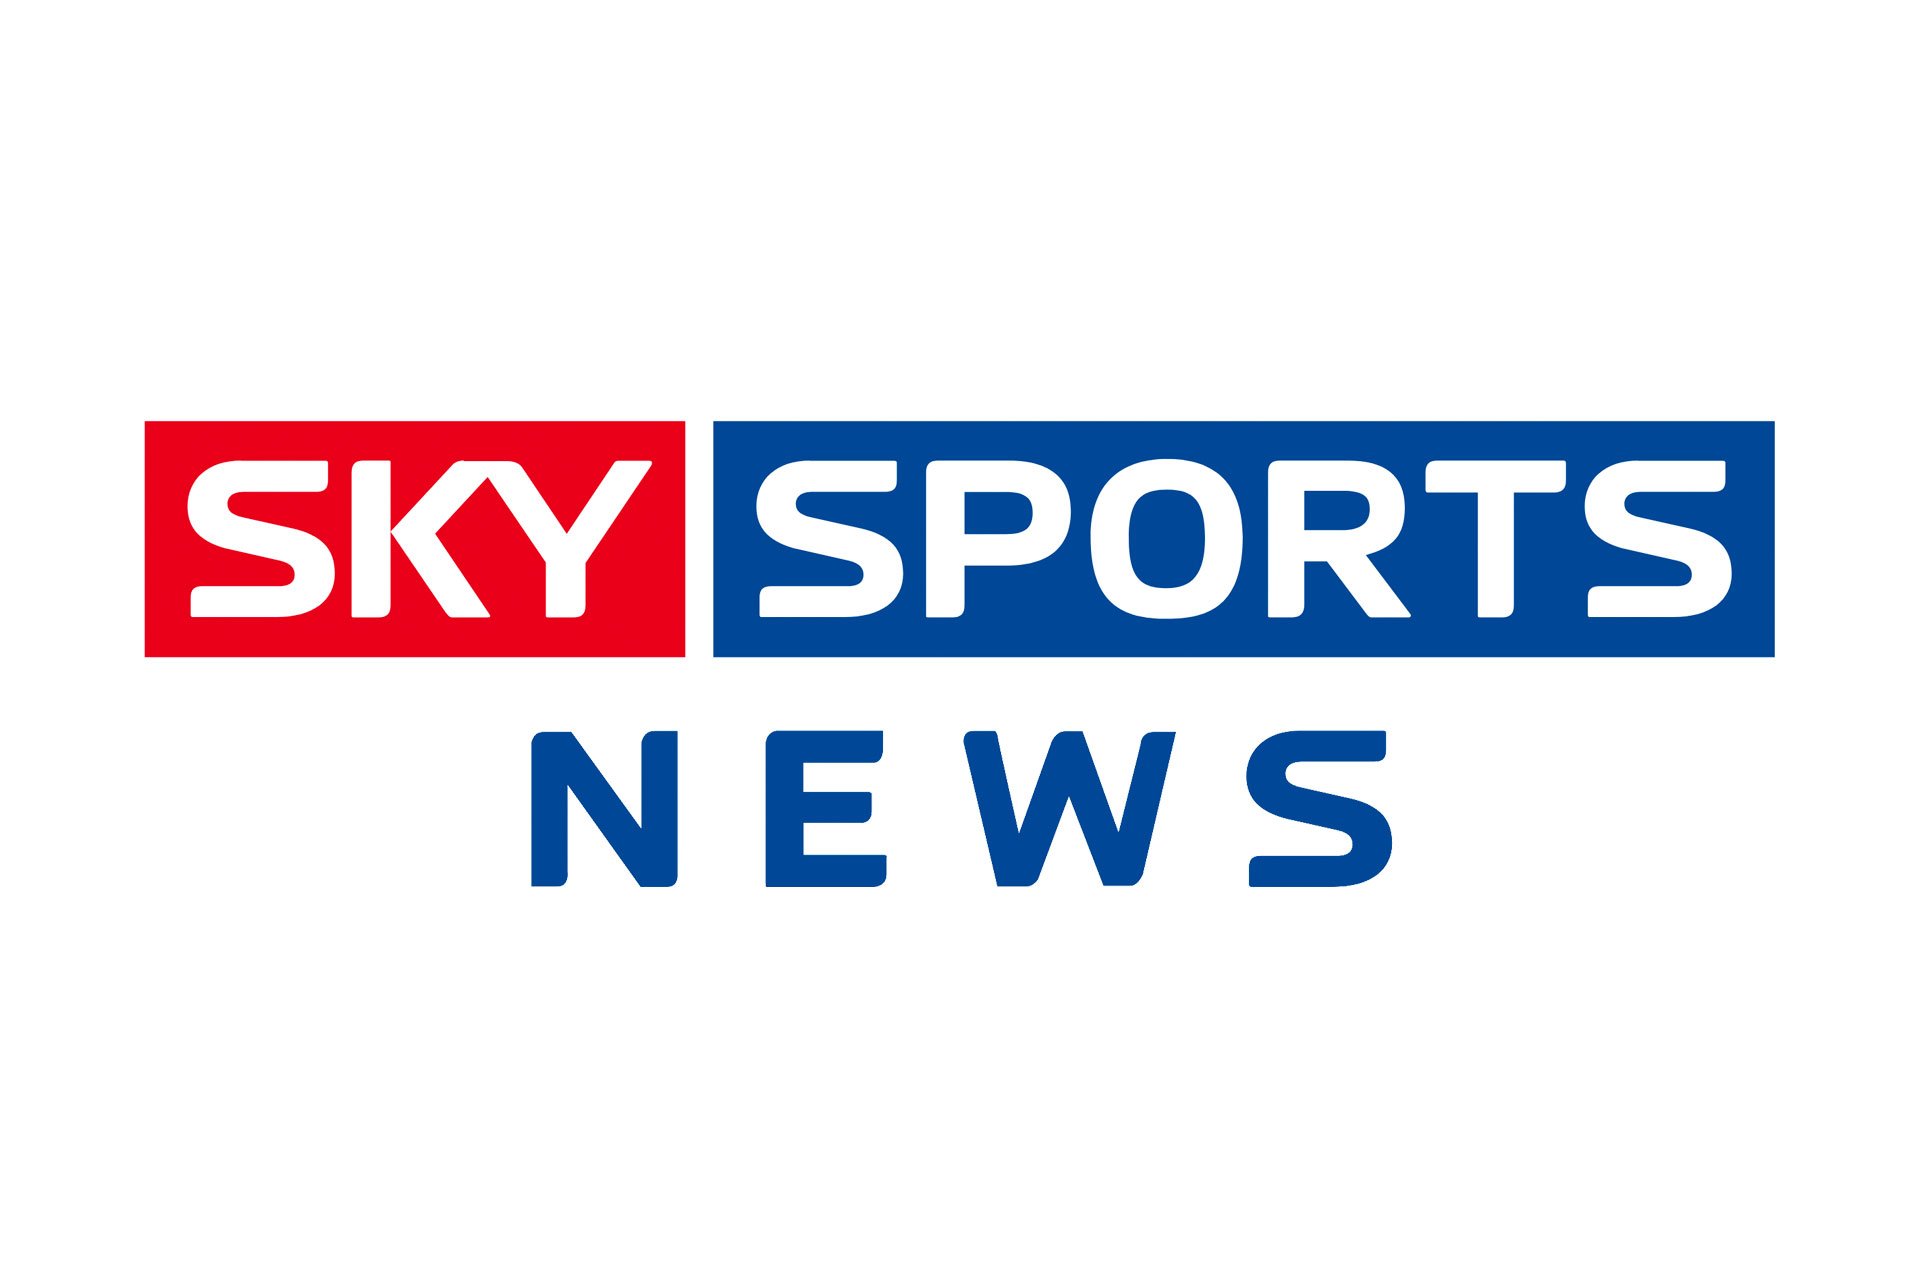 Dejero Enables Sky Sports News to Broadcast Live From All 92 English Football Clubs in a Single Day